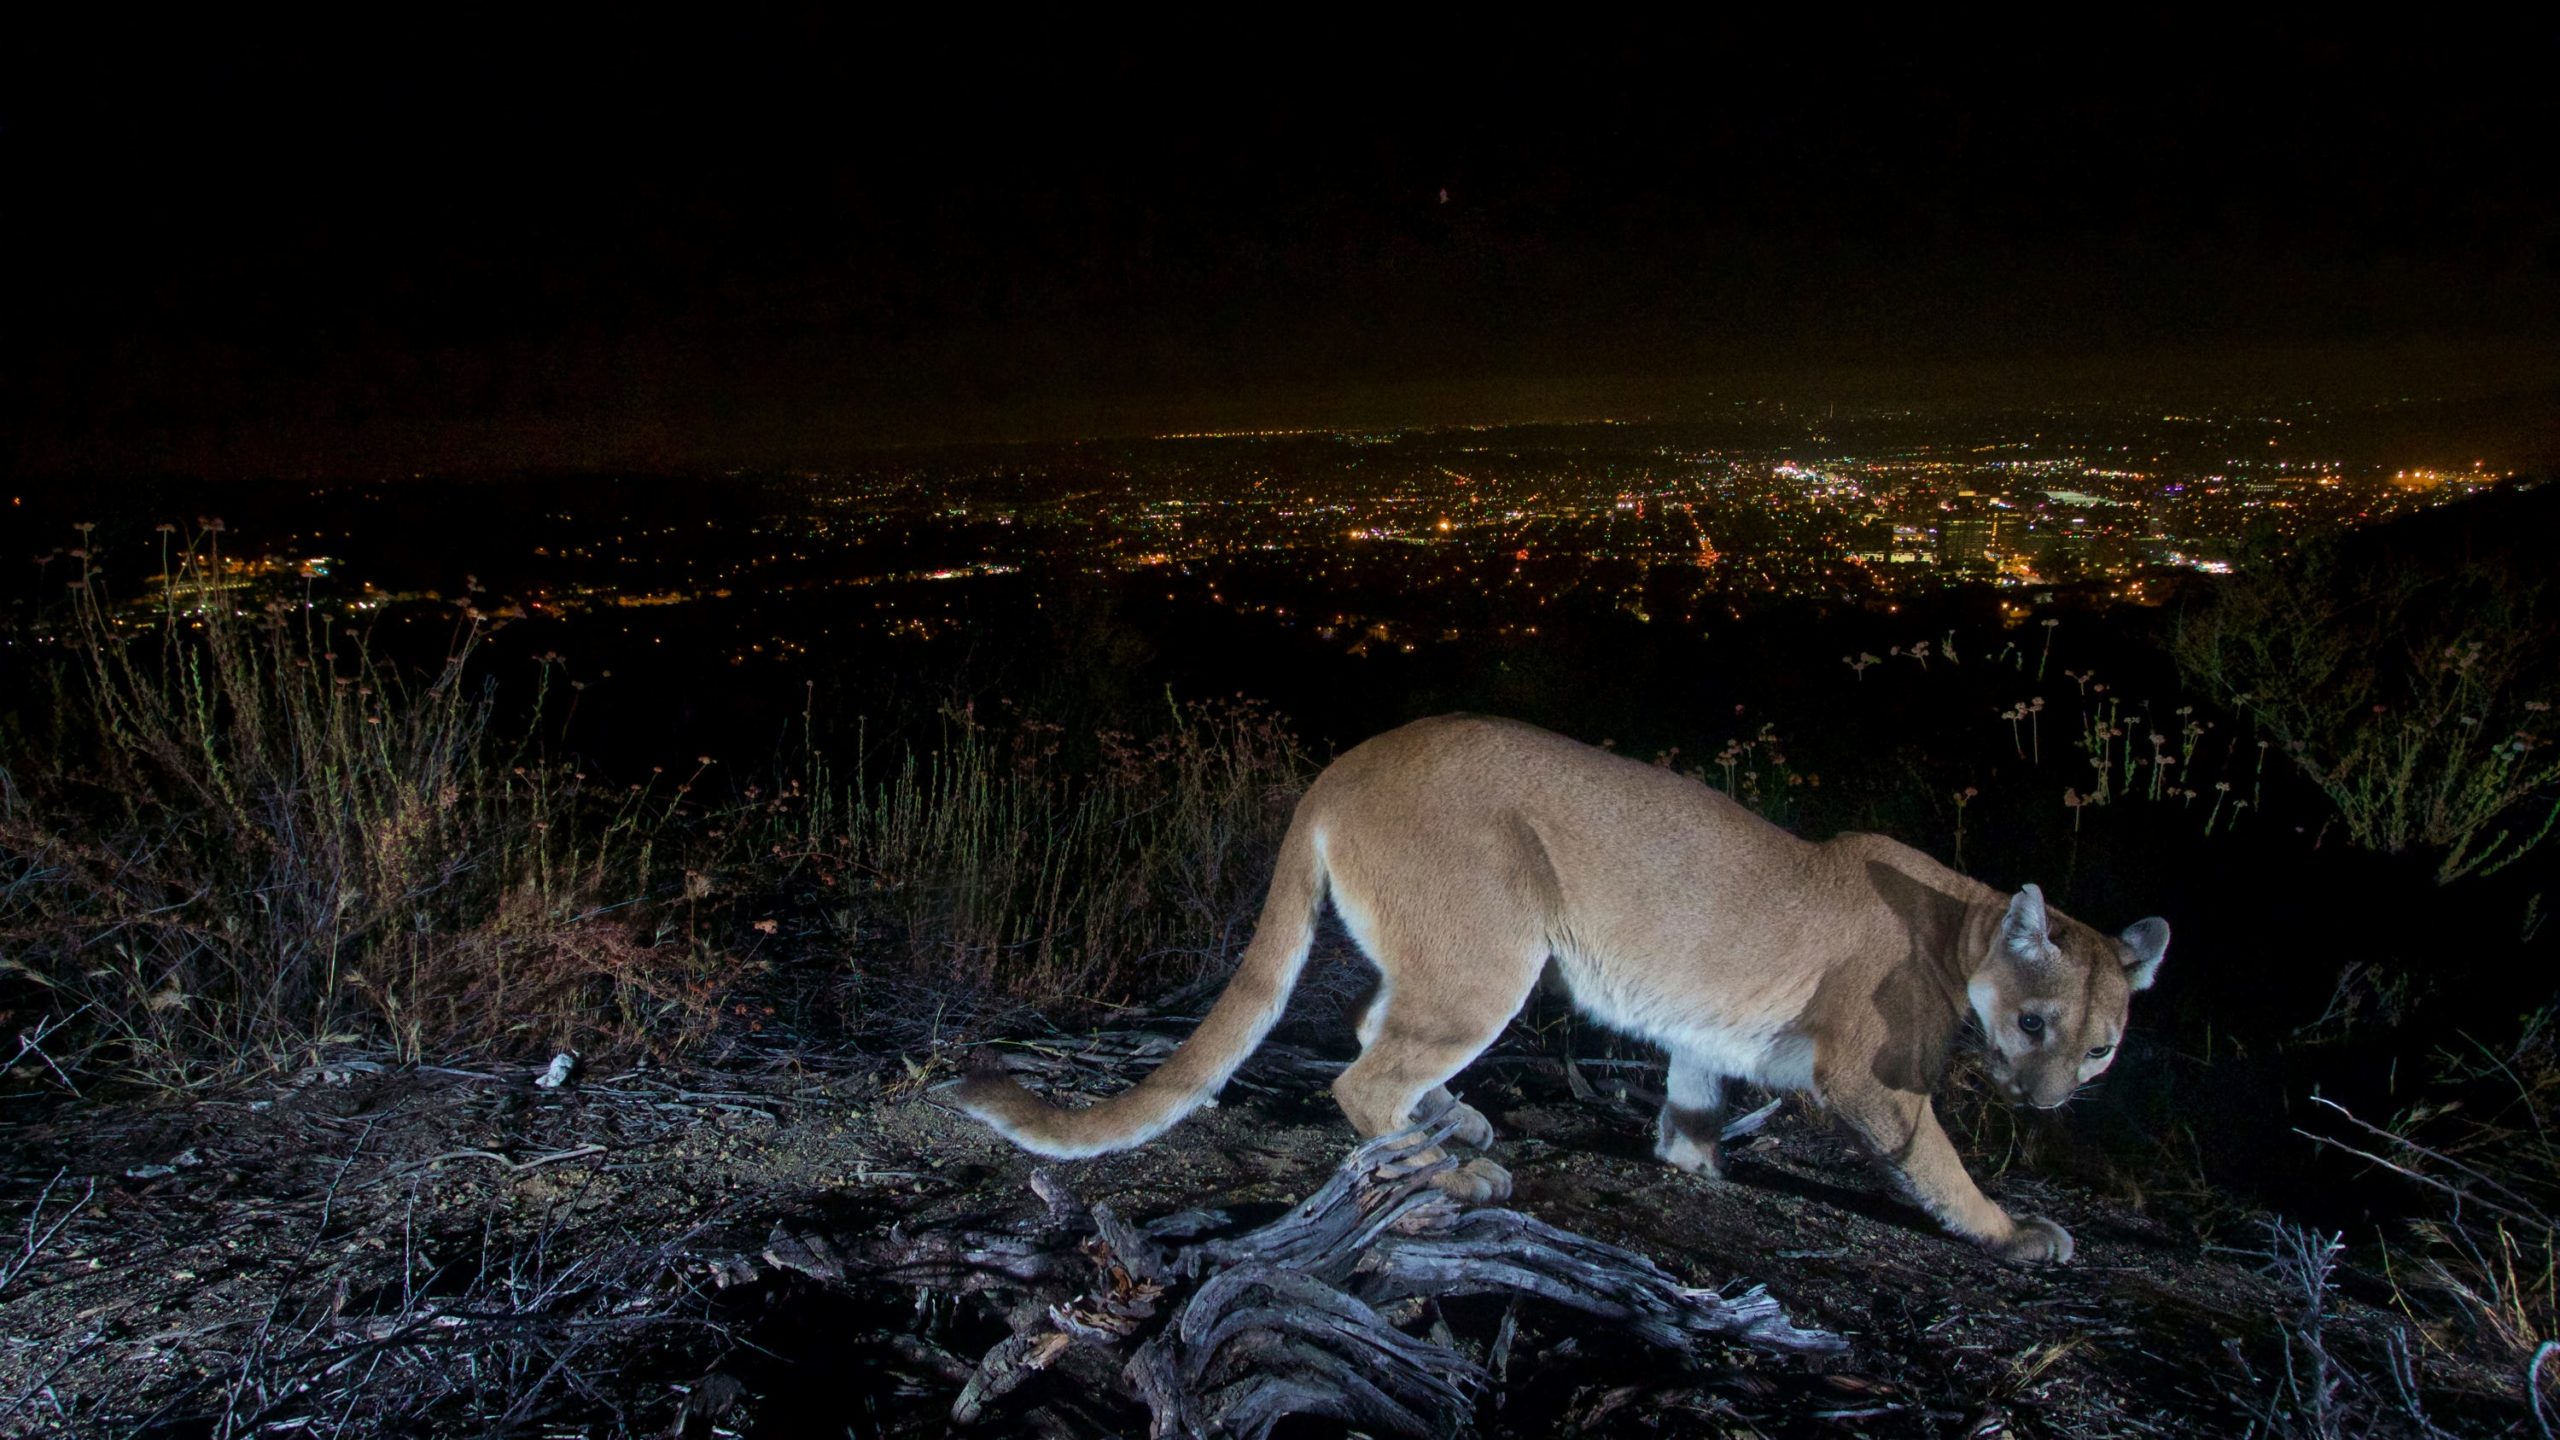 Mother becomes ‘the true hero’ after punching mountain lion that attacked her 5-year-old son